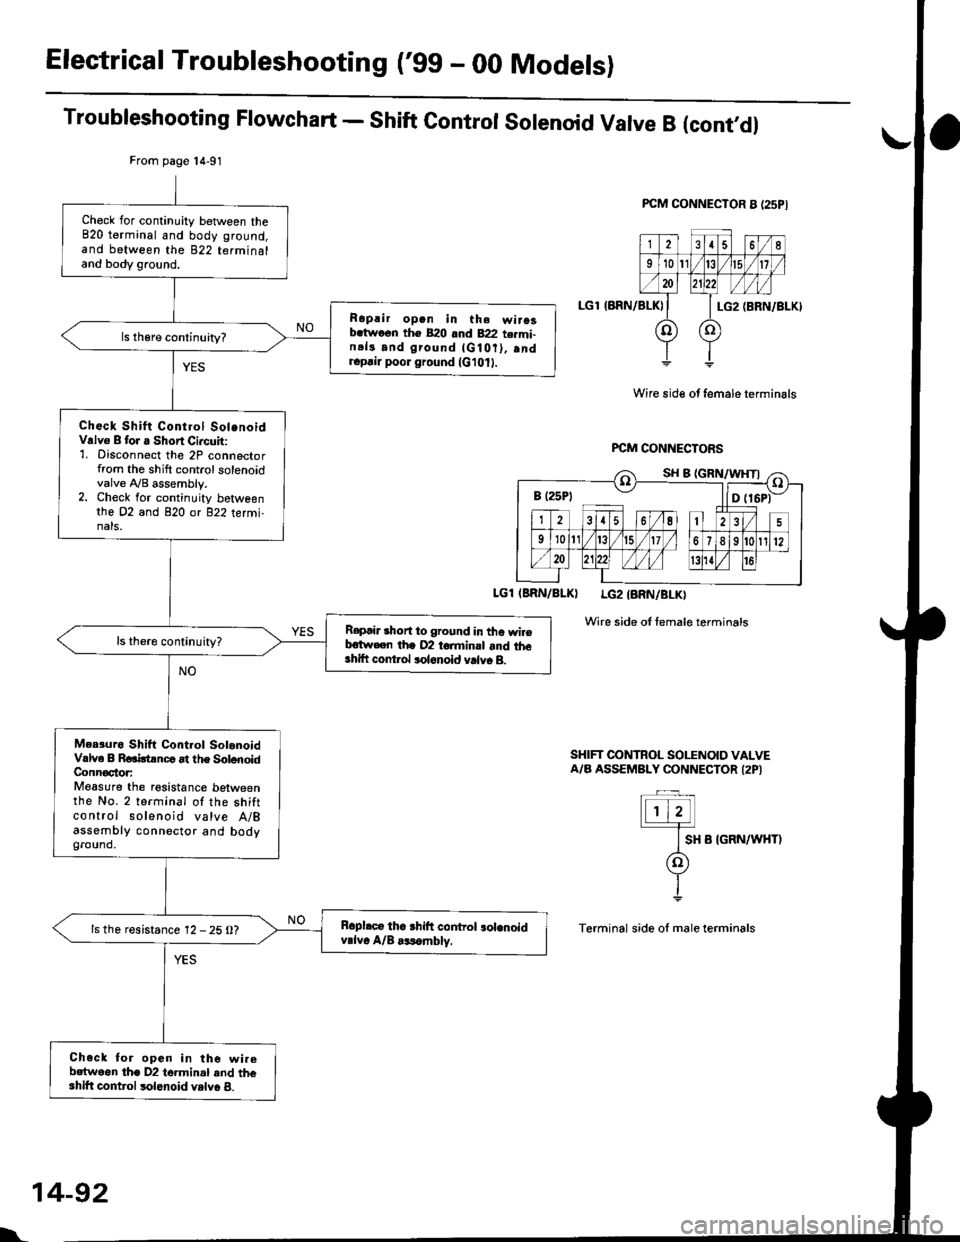 HONDA CIVIC 1998 6.G User Guide Electrical Troubleshoot:ng (gg - 00 Models)
Troubleshooting Flowchart - Shift Control Solenoid Valve B (cont,dl
PCM CONNECTOR A {25PI
LGl (BRN/BLK)
IBRN/BLKI LG2IBRN/BLK)
Wire side of temale terminal